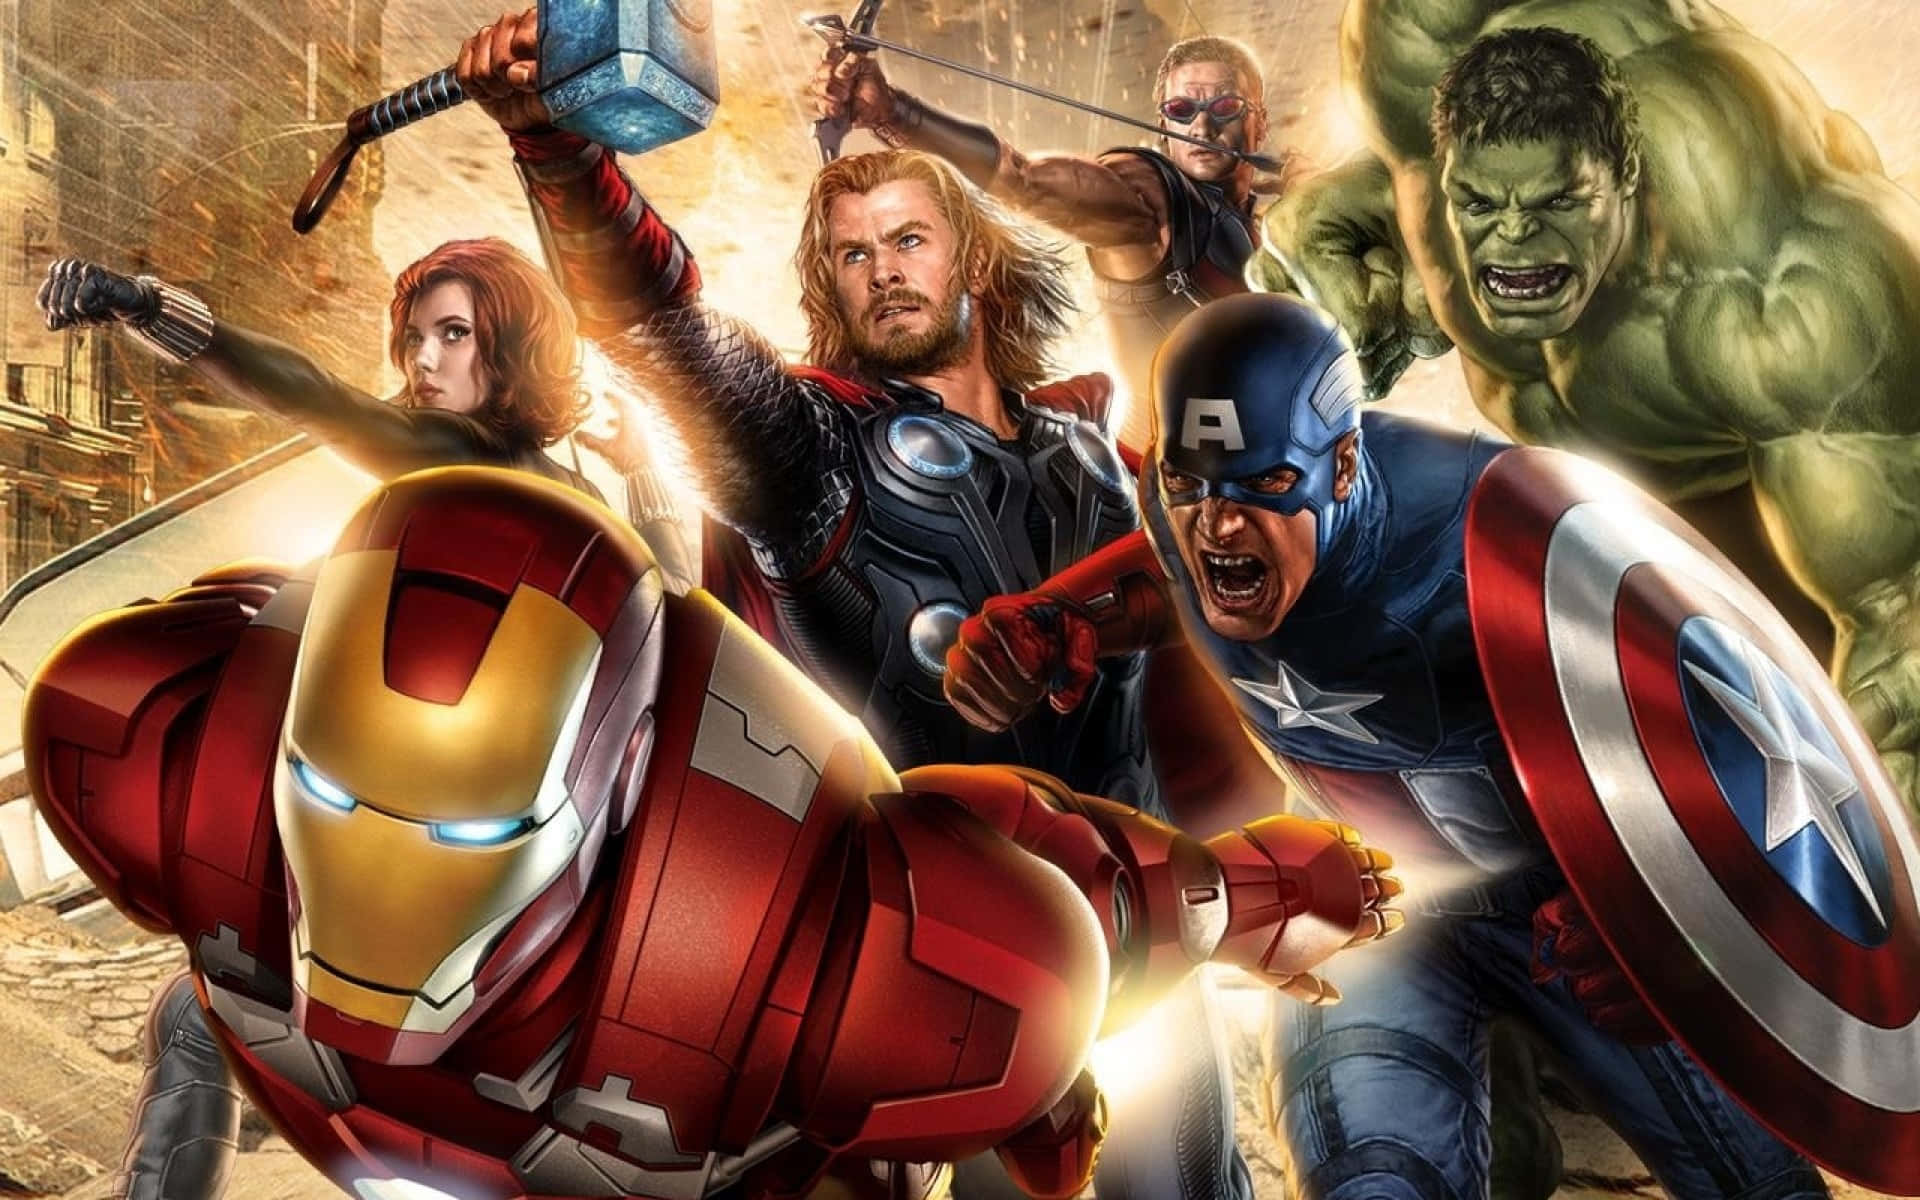 Avengers - The Movie Poster With Avengers Characters Wallpaper